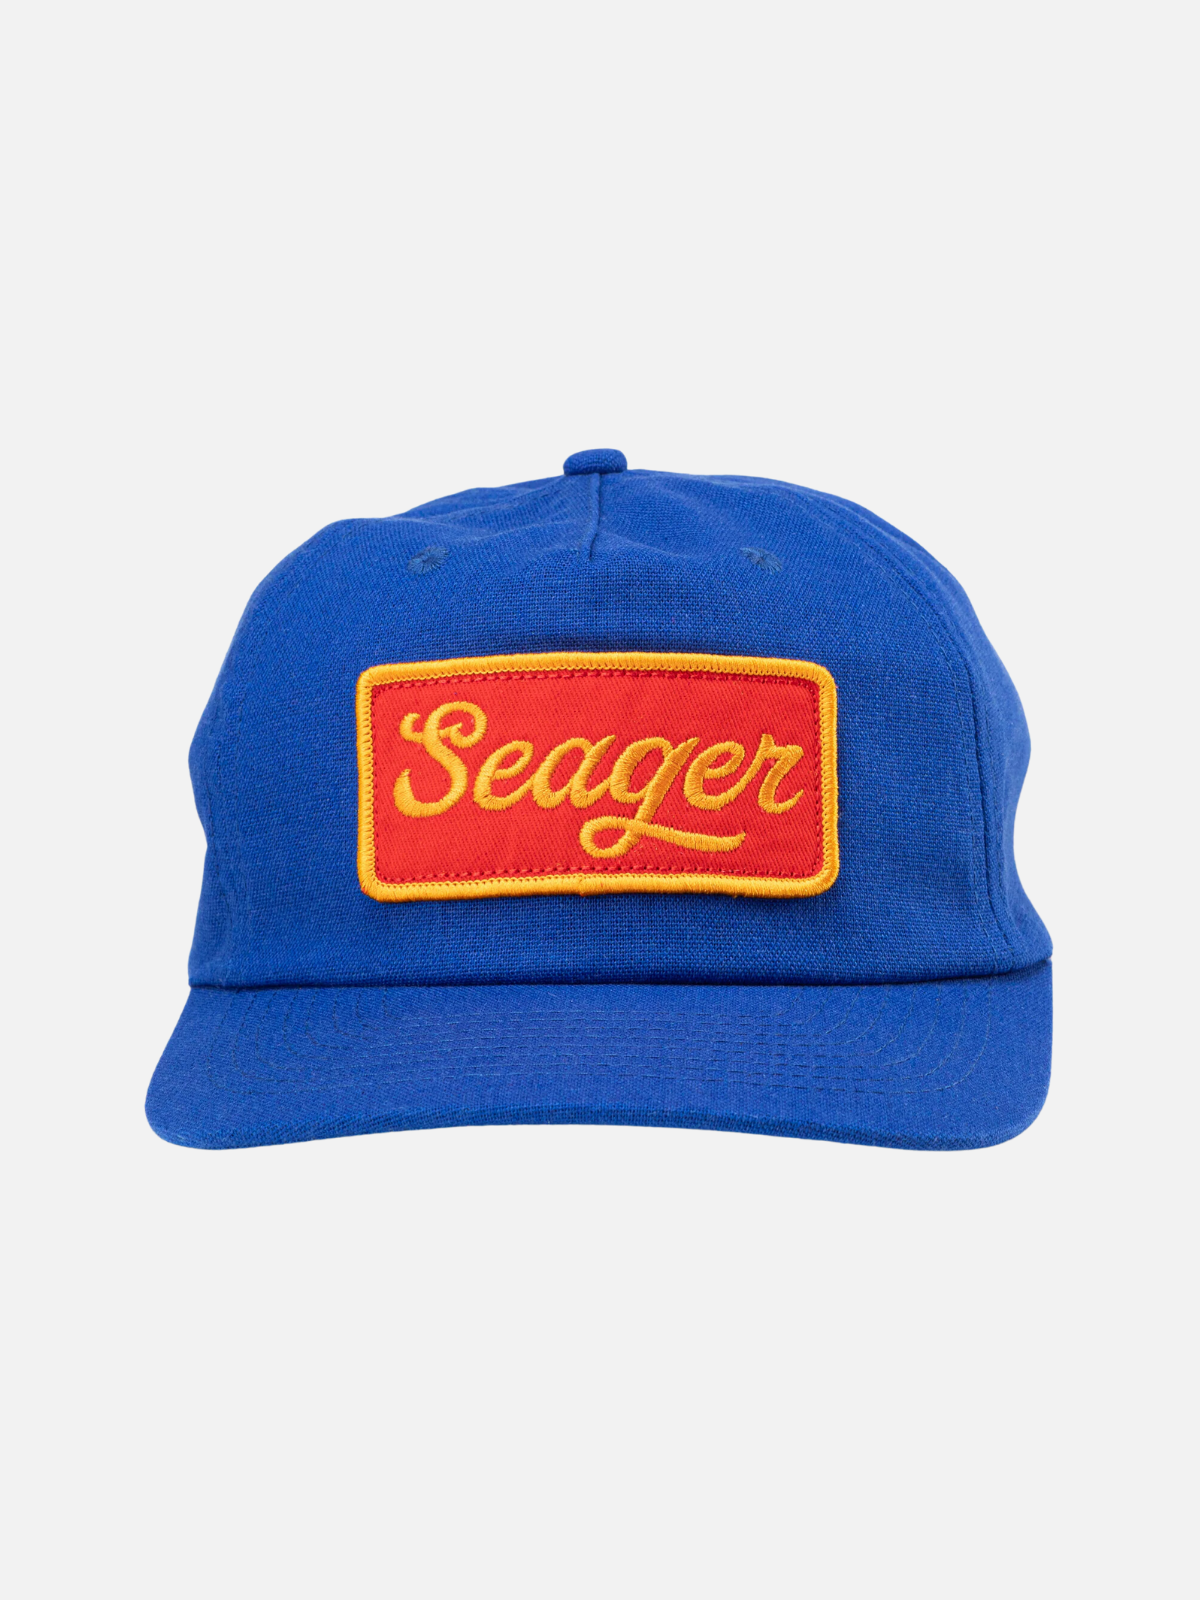 seager uncle bill hemp snapback cotton blend electric blue red gold yellow embroidered patch kempt athens ga georgia men's clothing store